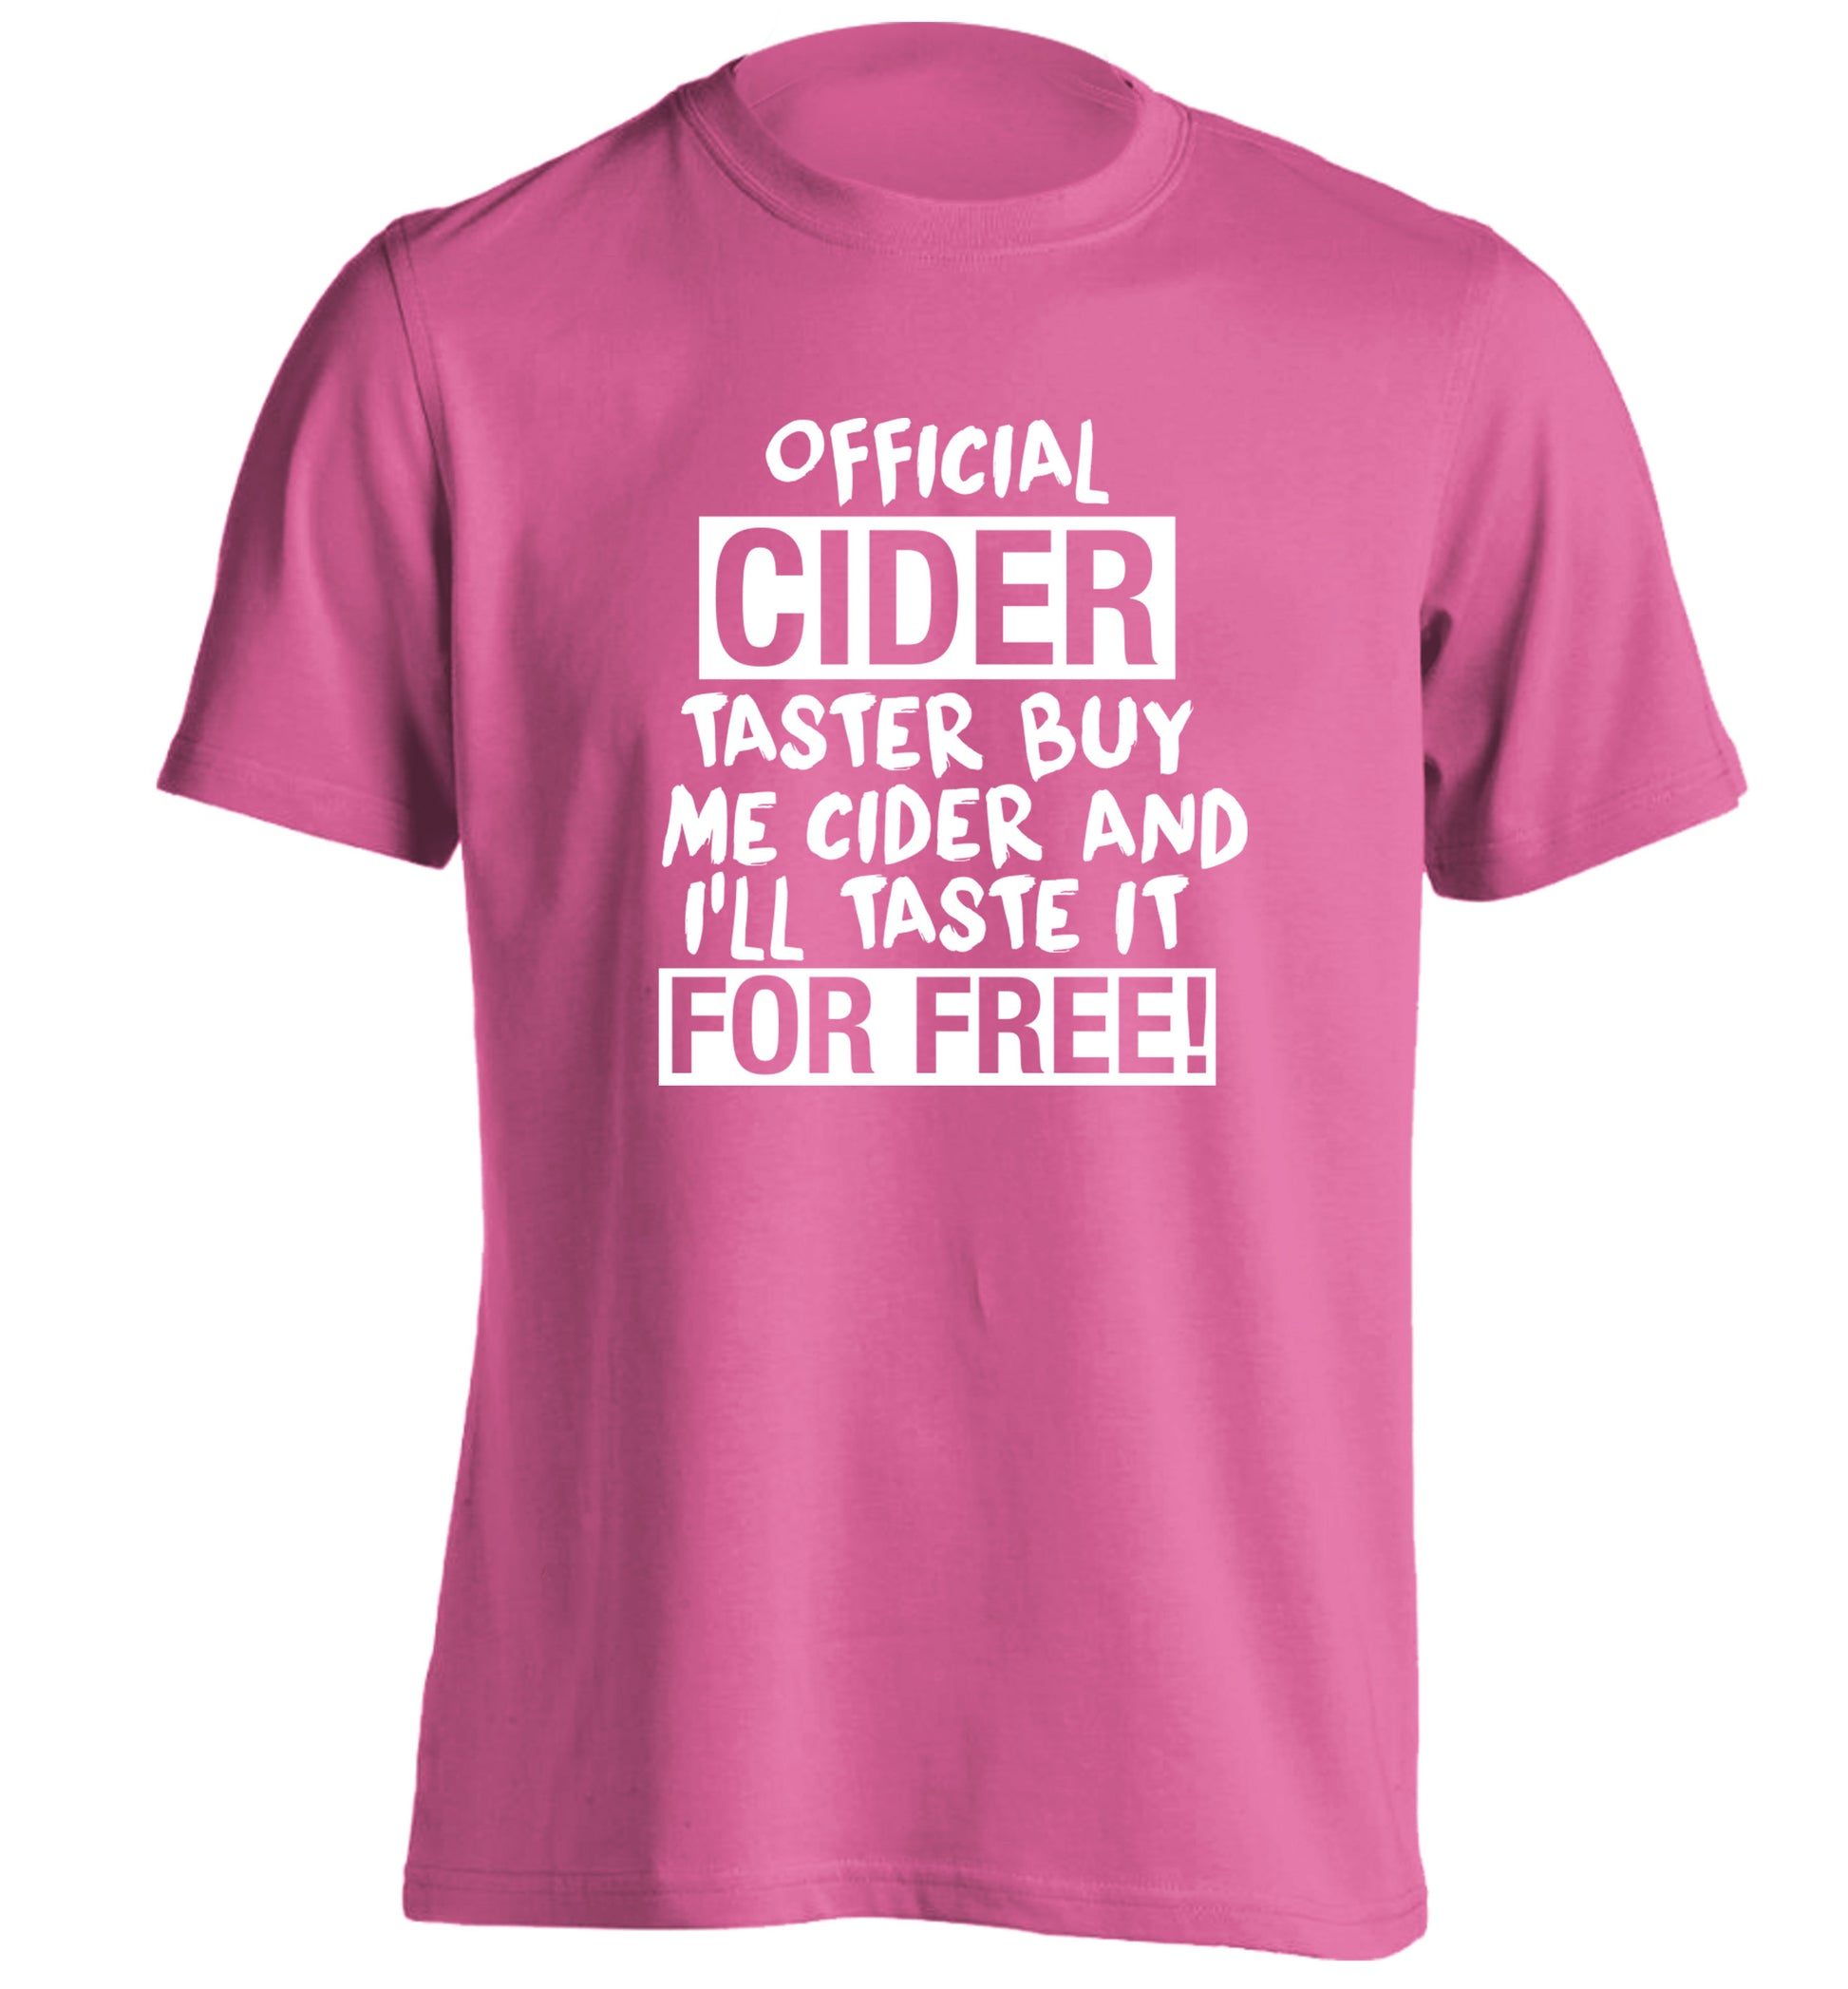 Official cider taster buy me cider and I'll taste it for free! adults unisex pink Tshirt 2XL